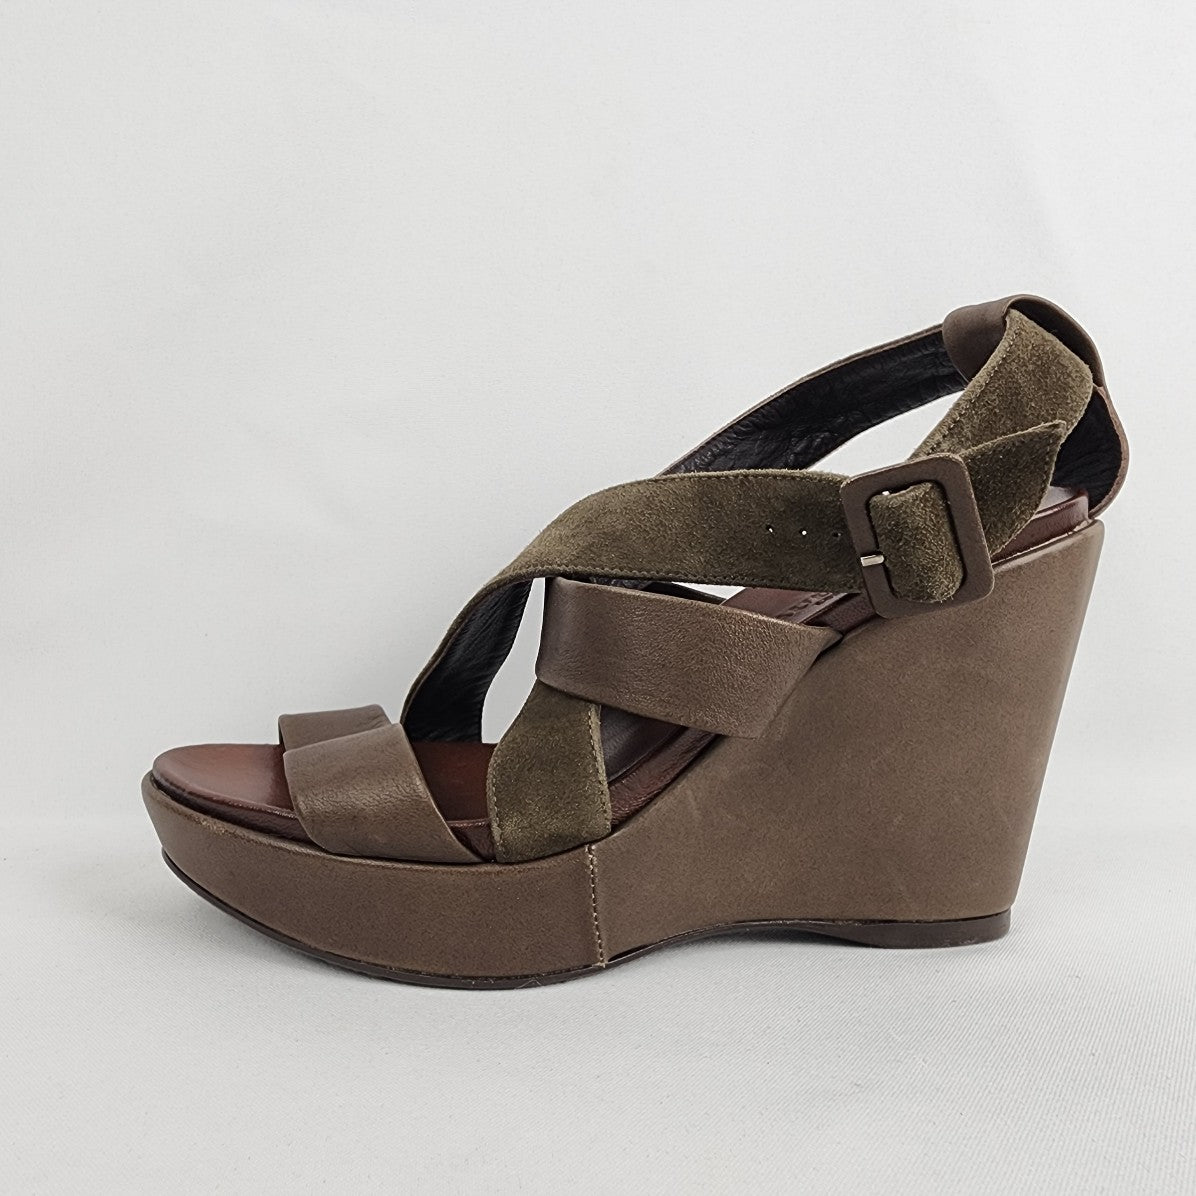 Audley Brown Leather & Suede Wedge Heel Sandals Size  8